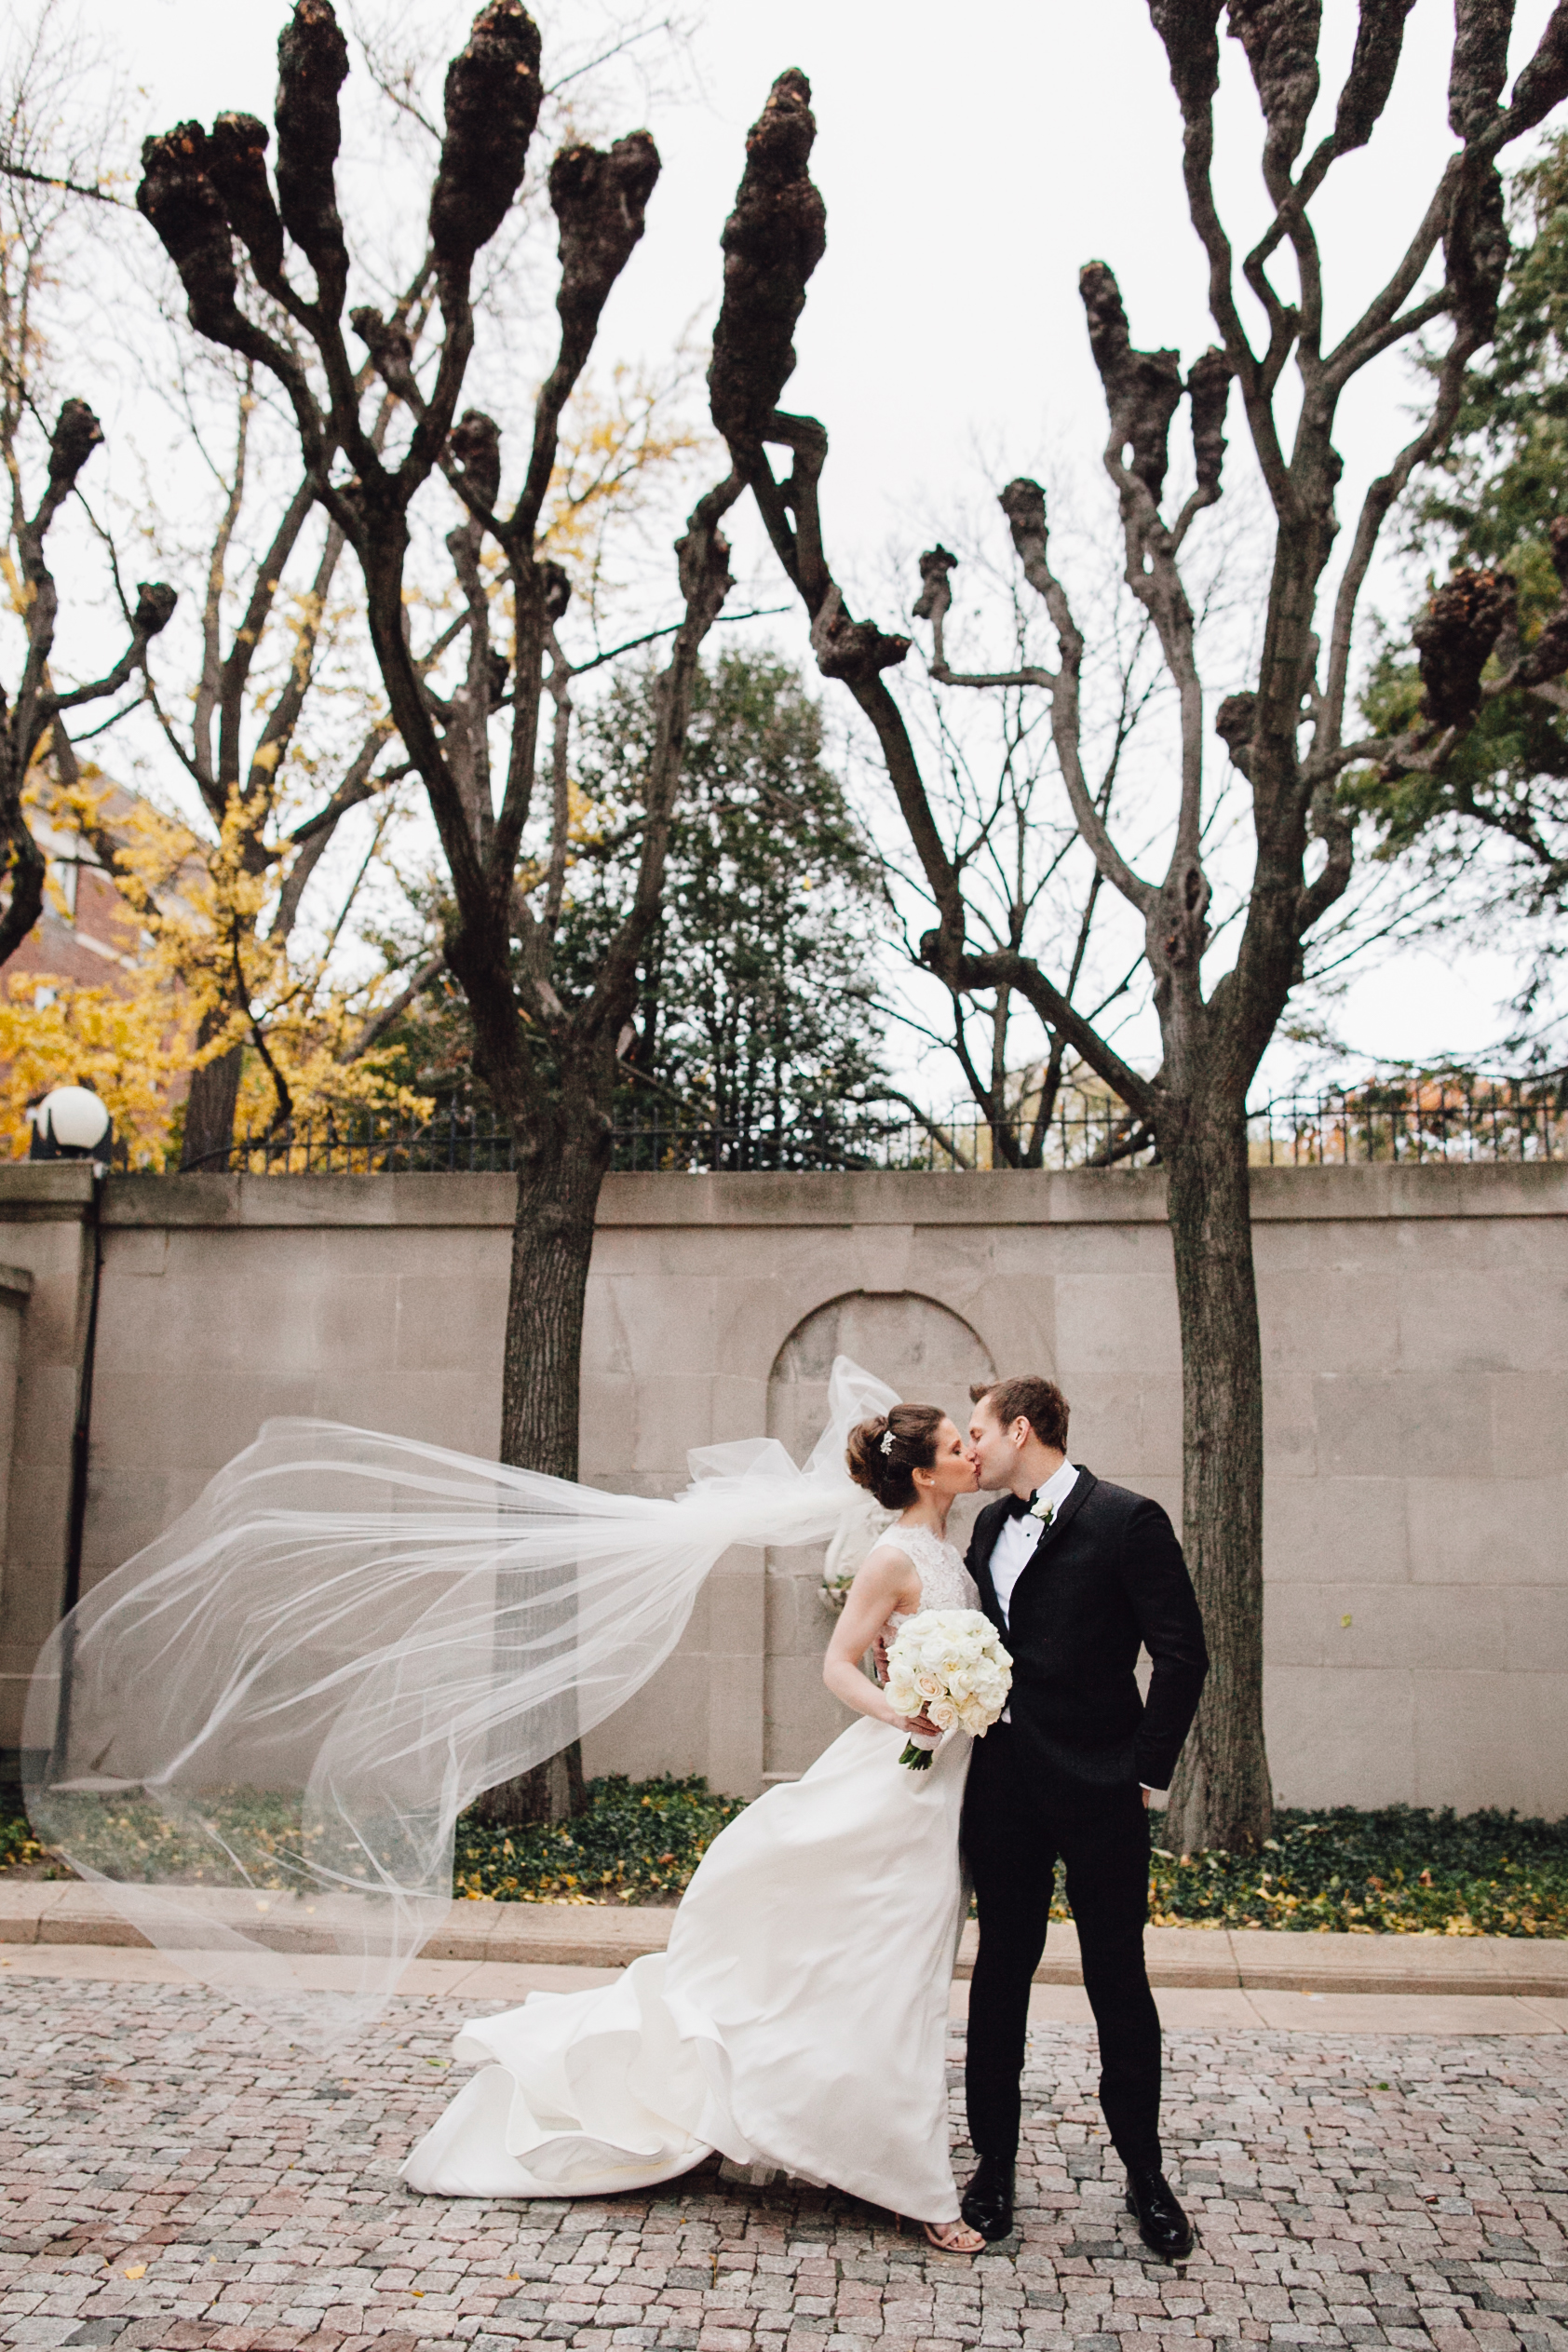 Windy portrait of the bride and groom at Meridian House in DC - Maria Vicencio Photography Weddings